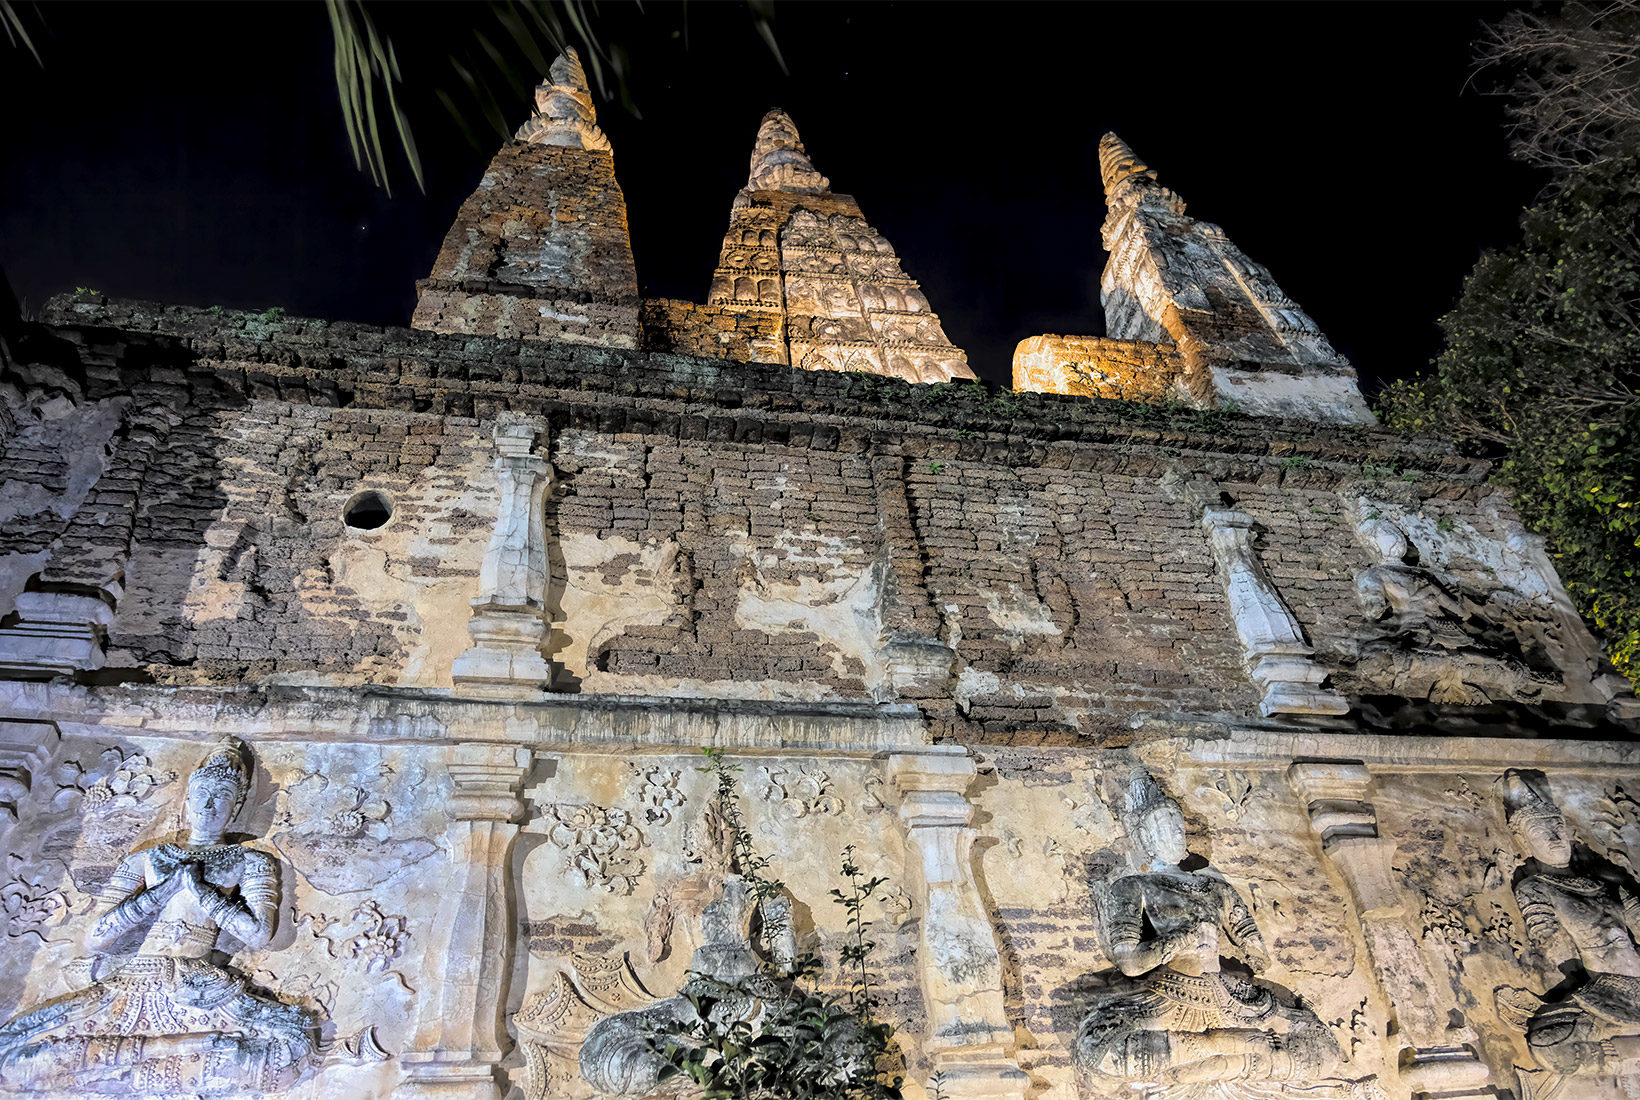 Some of the stucco carvings on the facade of the Viharn at Wat Jed Yod